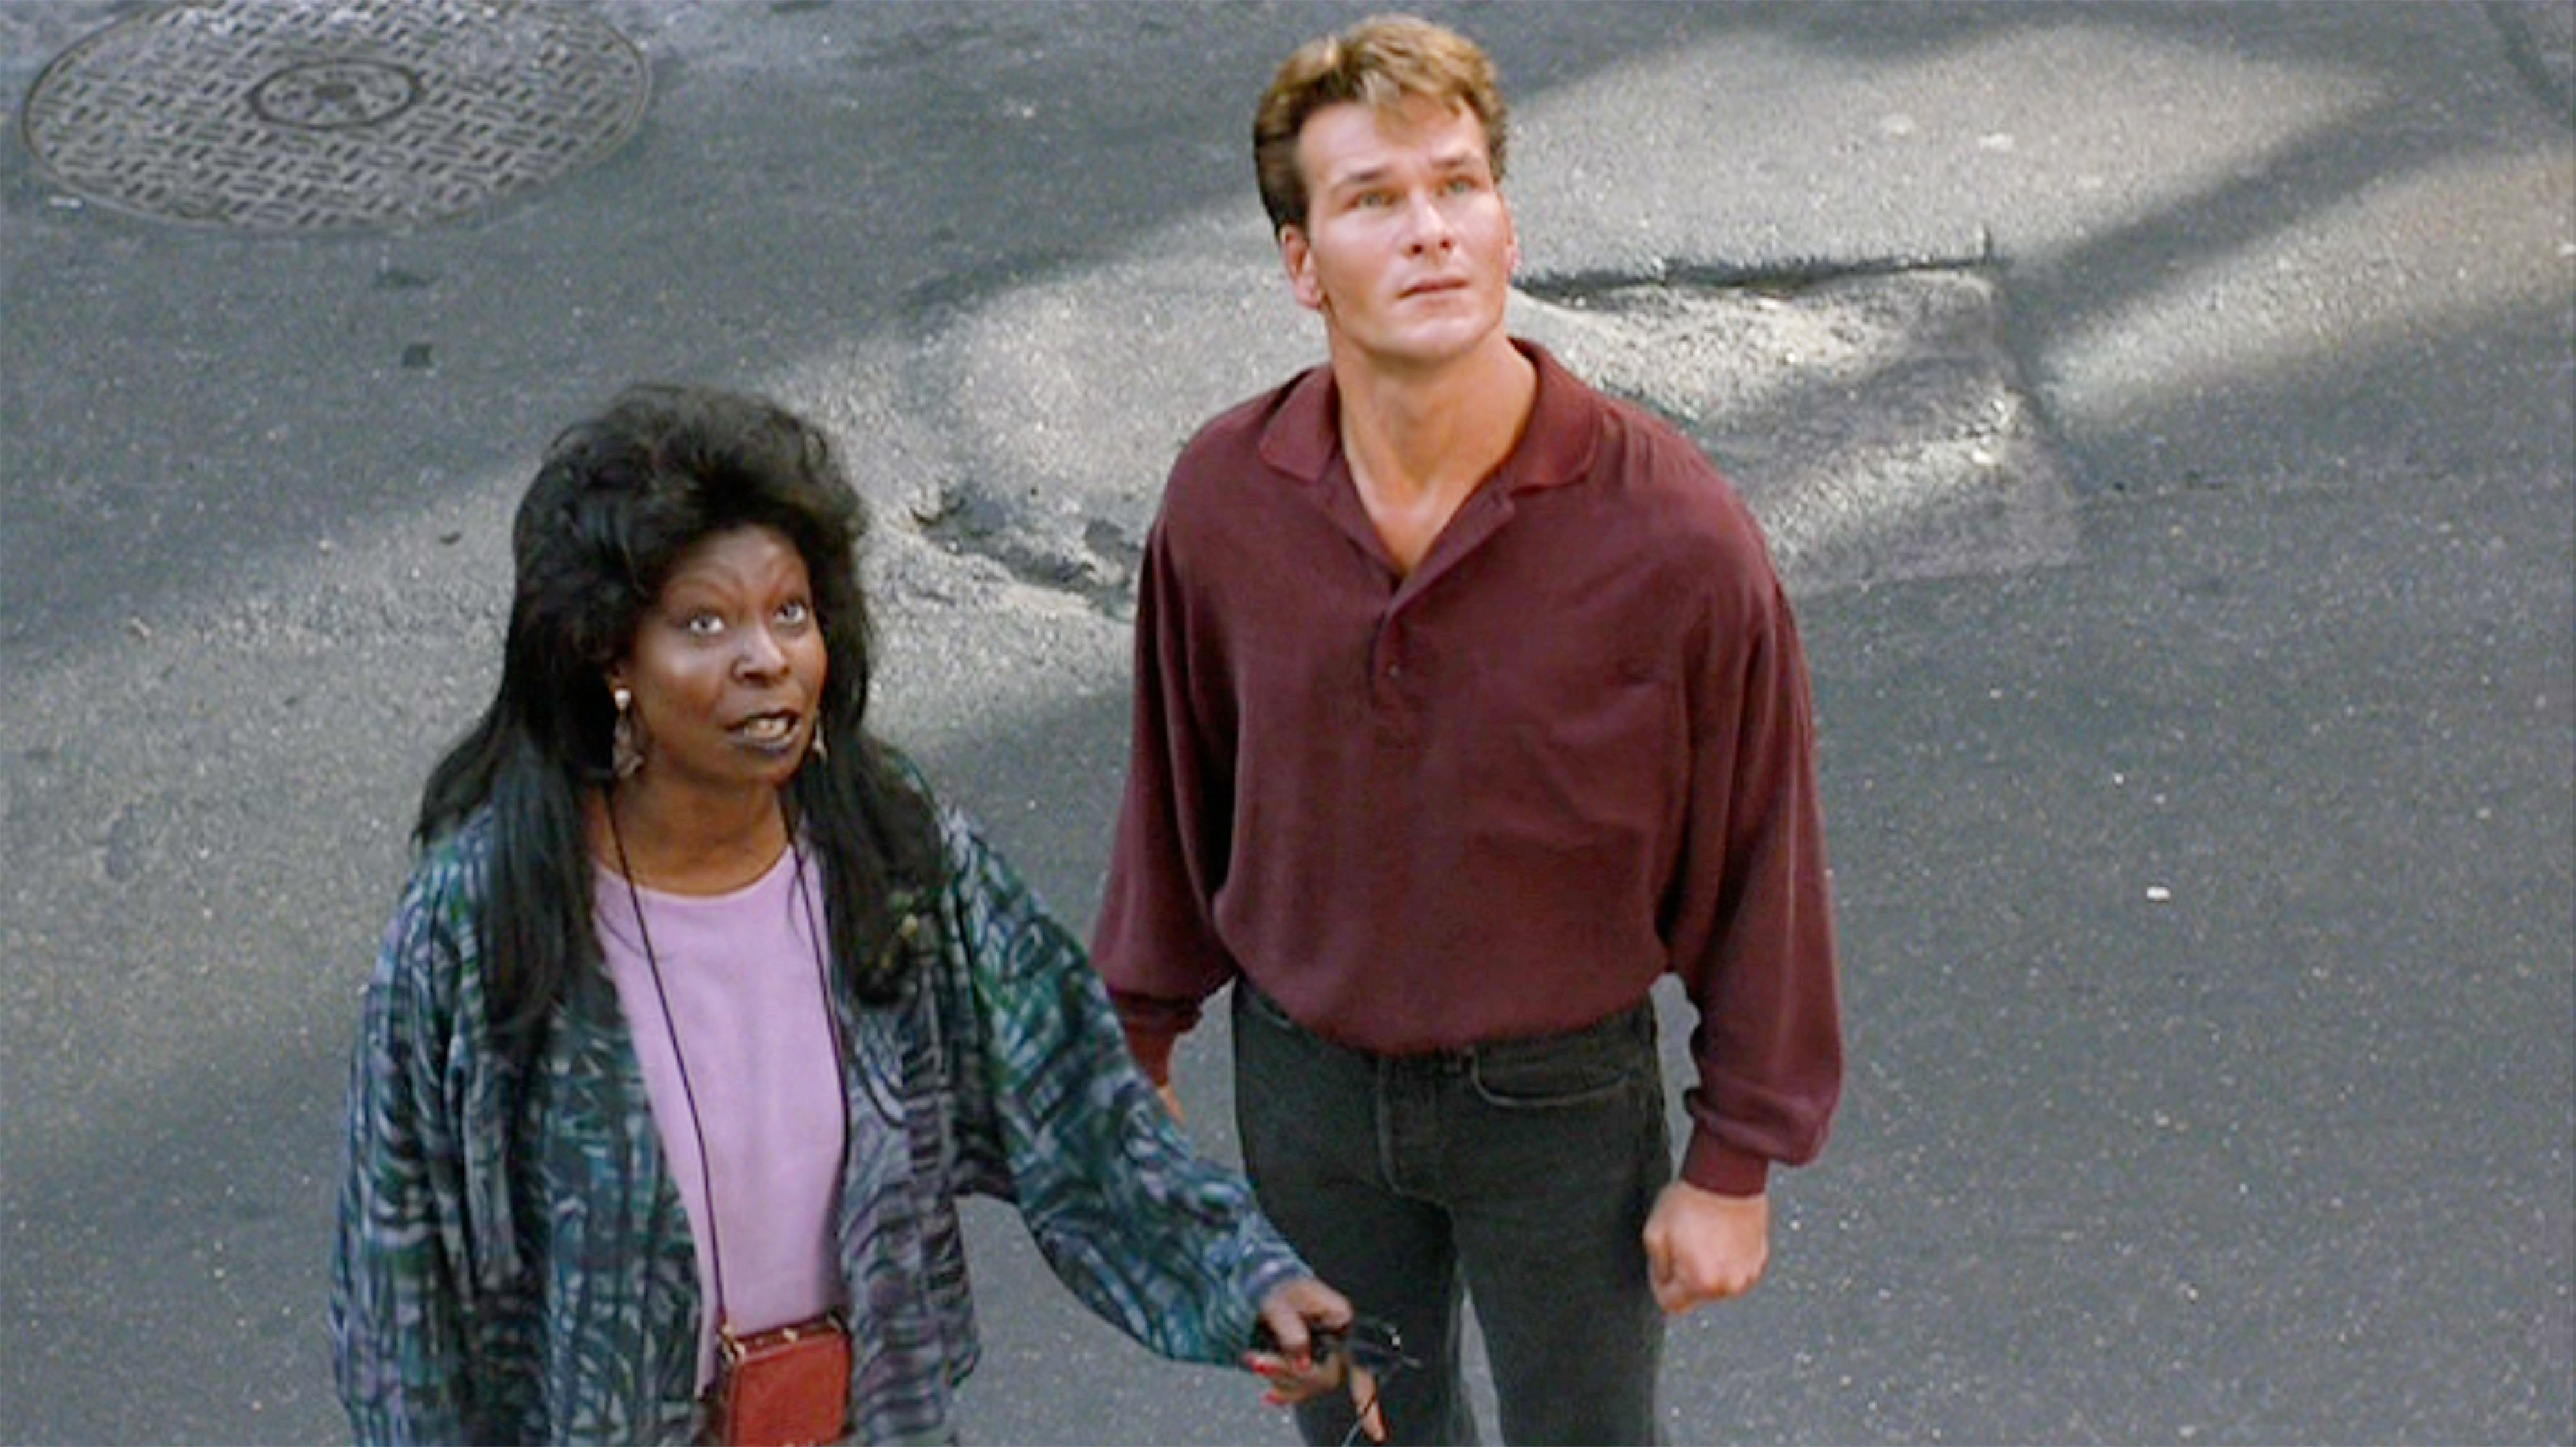 Whoopi Goldberg and Patrick Swayze in a scene of 'Ghost' 